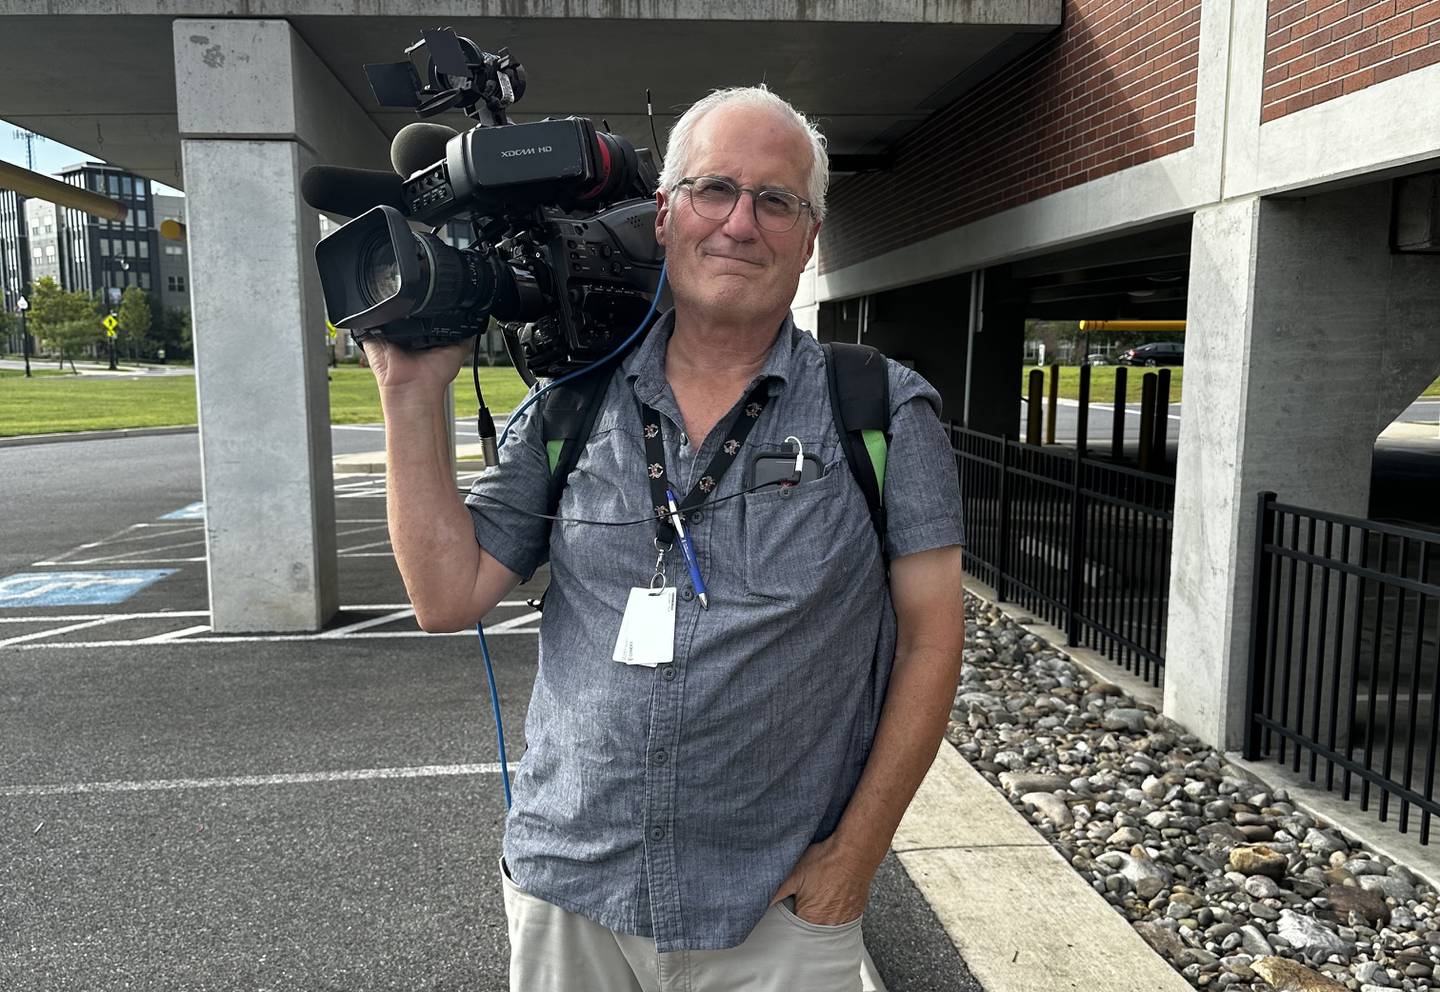 James “Mac” Finney, a cameraman who's worked at WBAL-TV for 40 years.